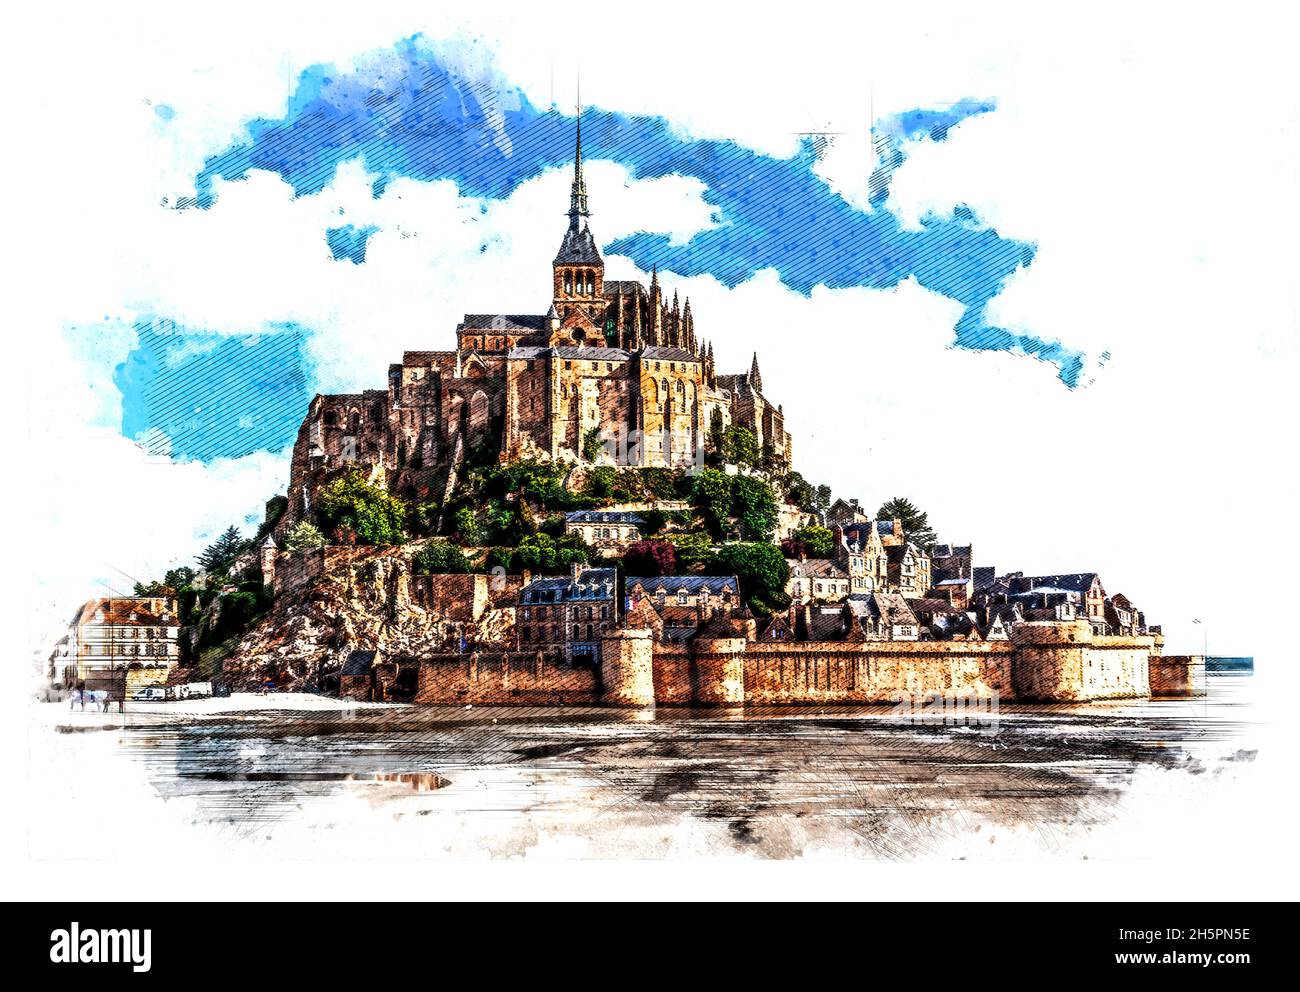 Picturesque view at the Mont Saint Michel. Le Mont Saint Michel island, one of the most visited historical sites France. Artistic style illustration. Stock Photo